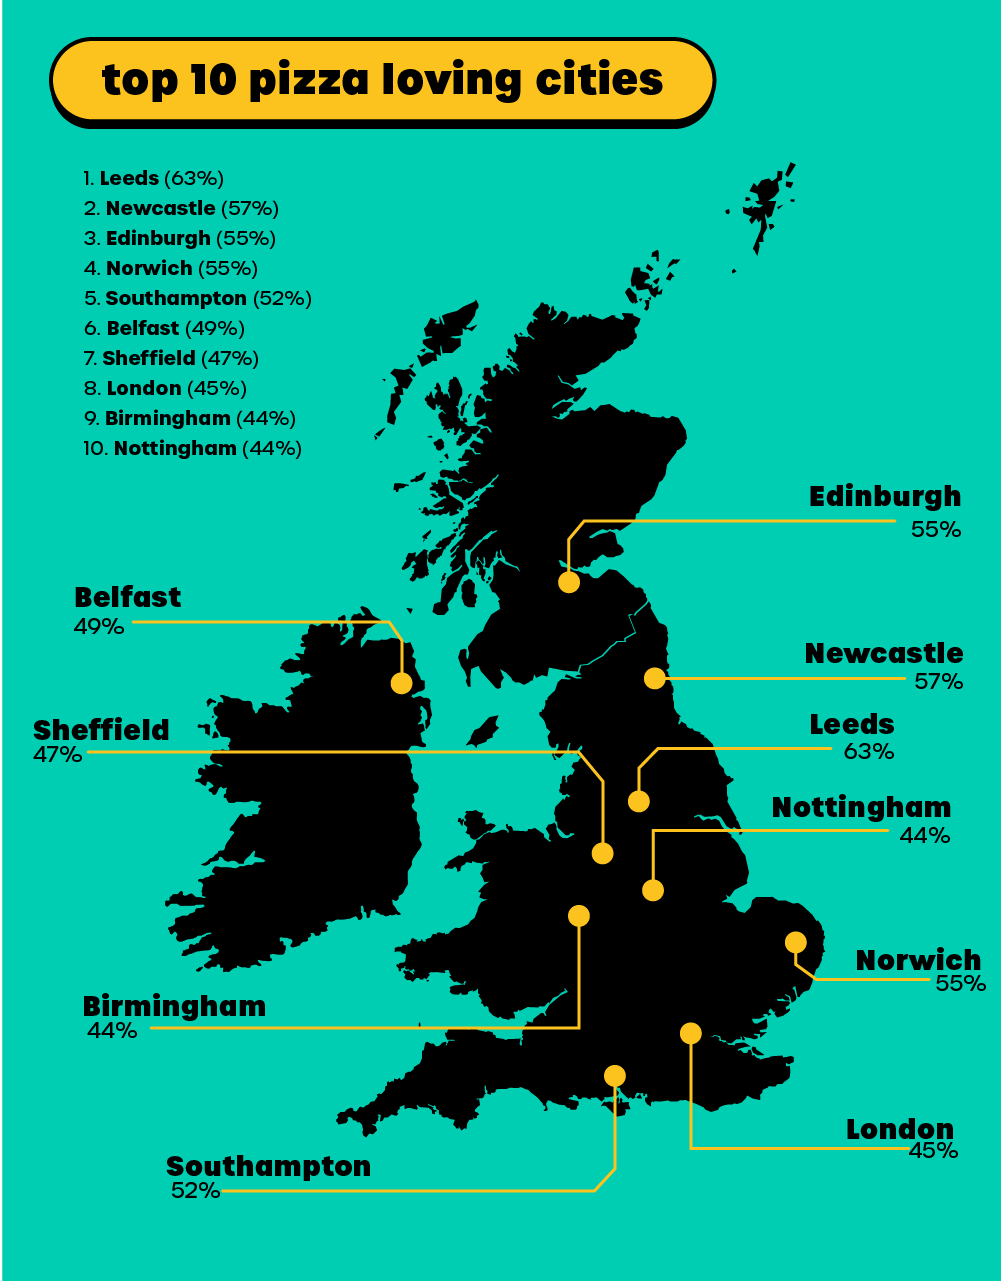 giffgaff top pizza loving locations INFOGRAPHIC